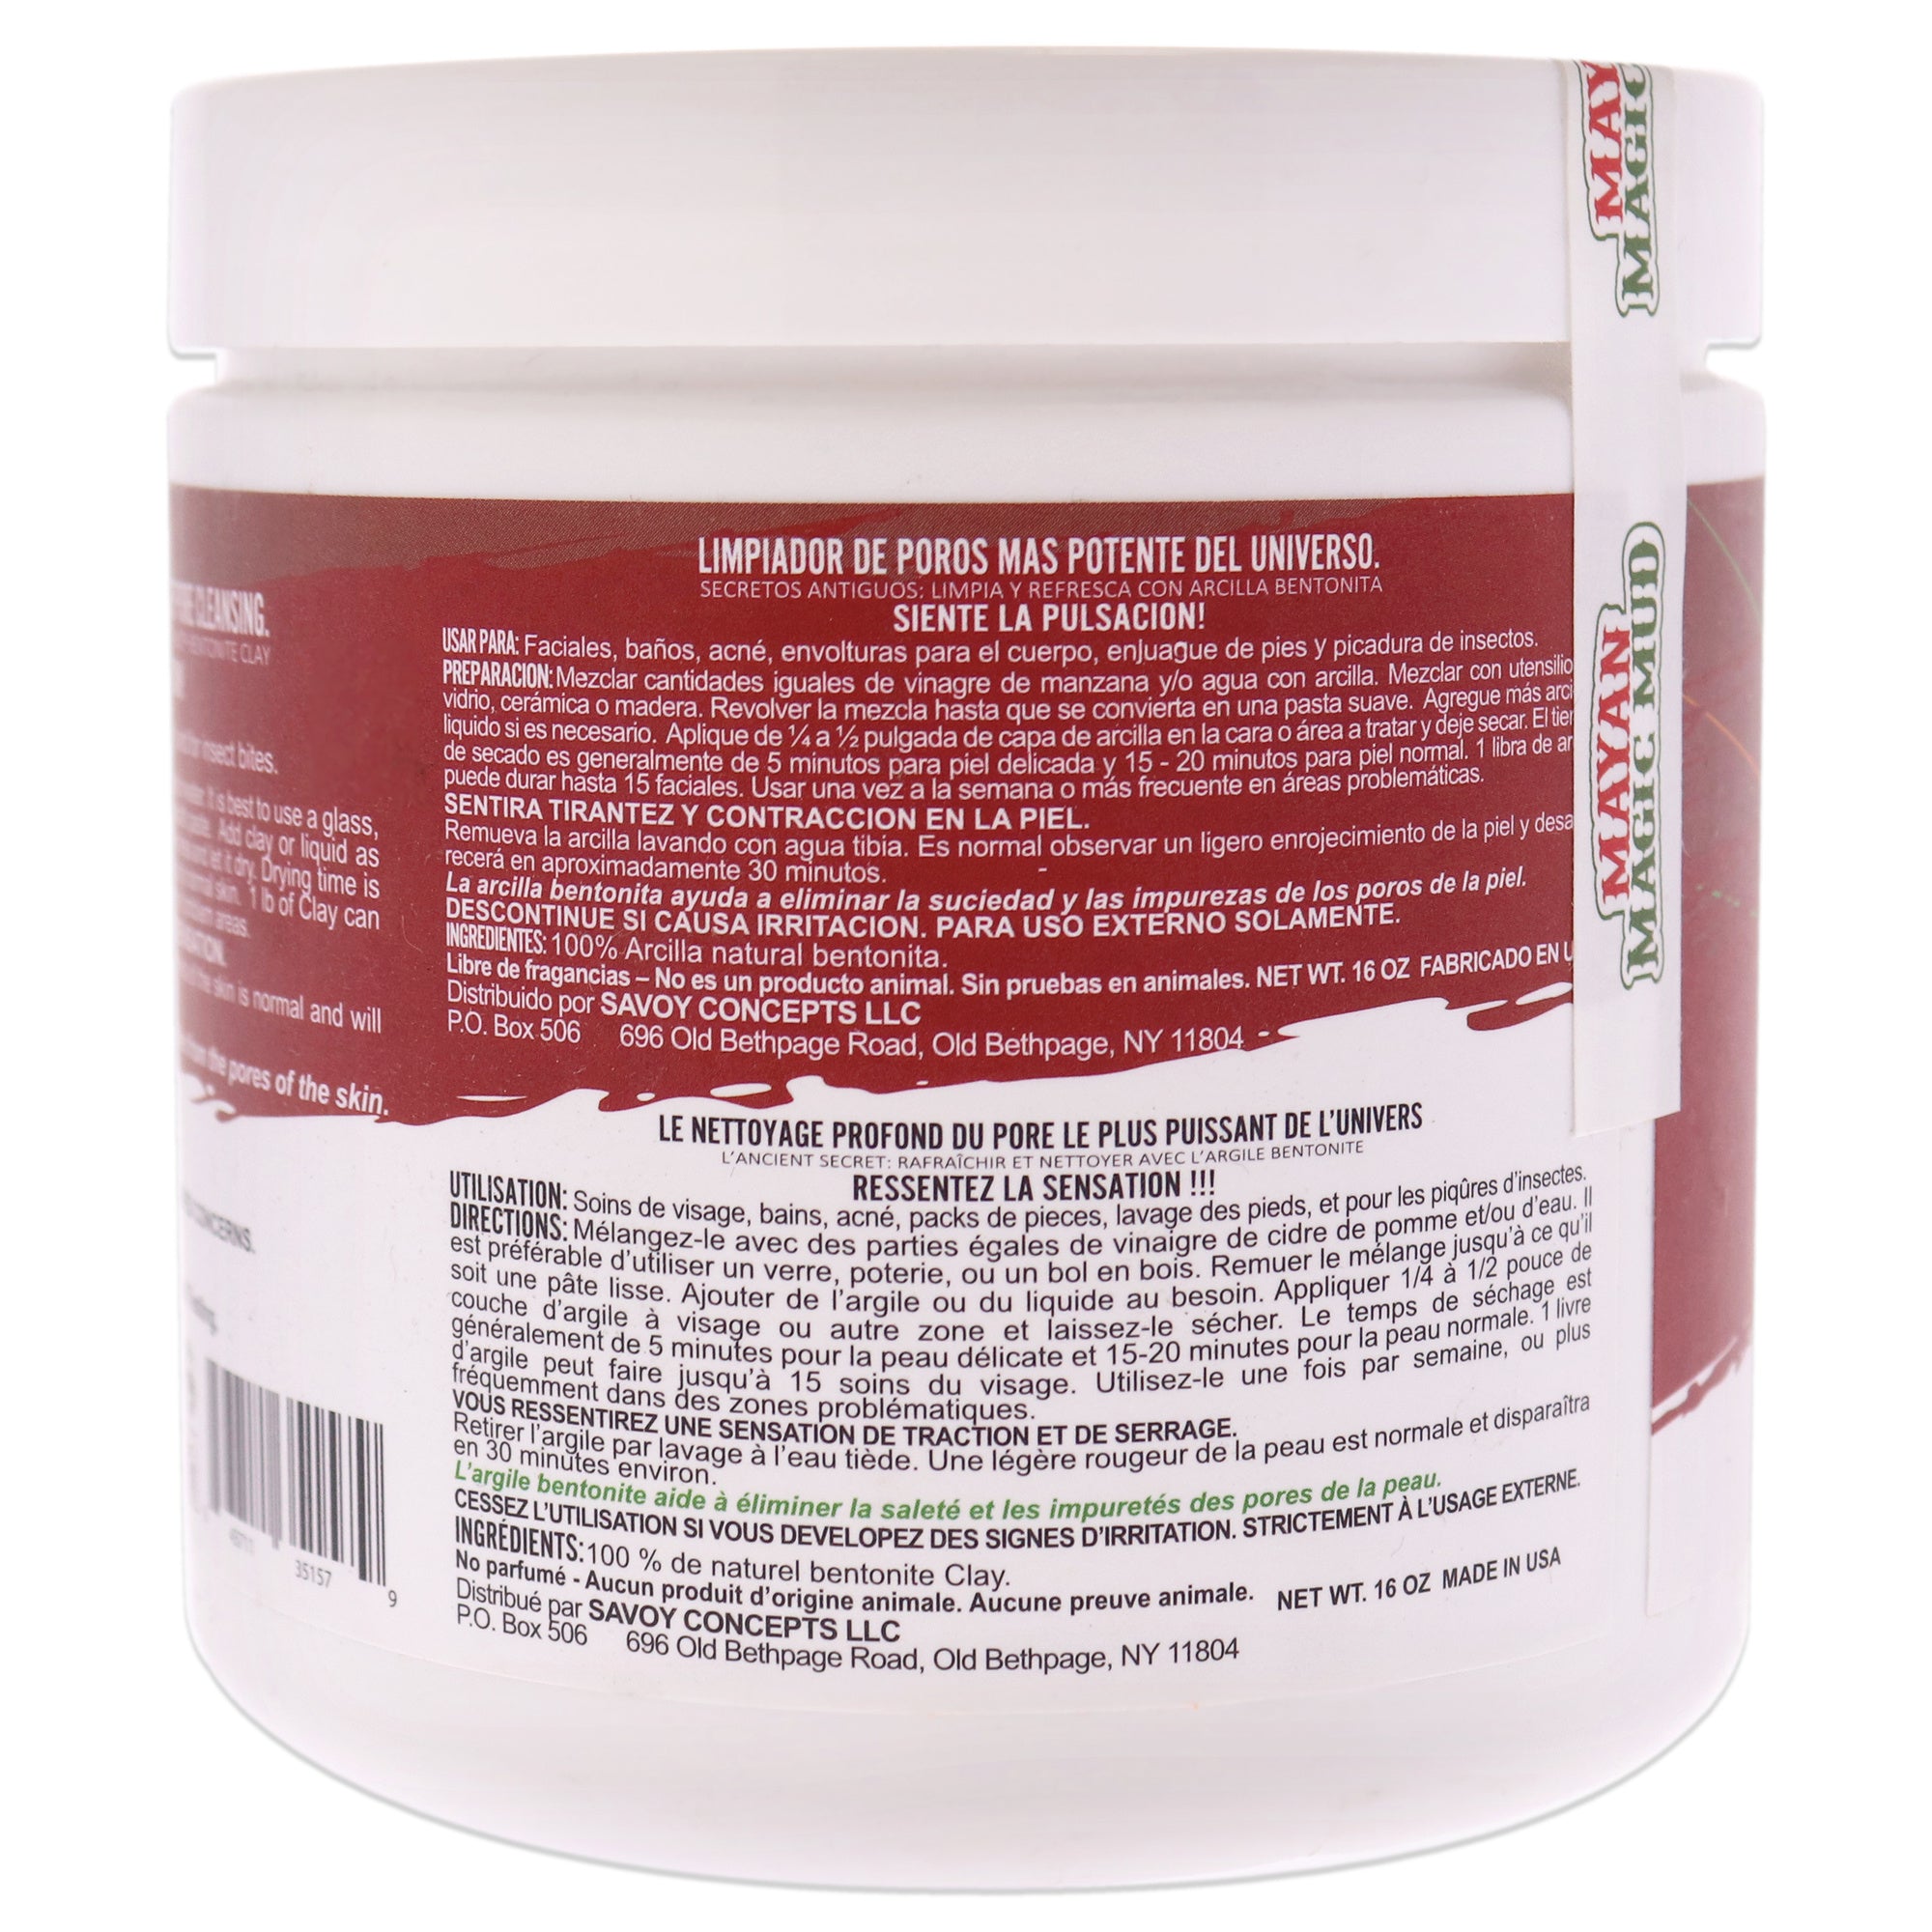 Powerful Deep Pore Cleansing Sodium Bentonite Clay by Mayan Magic Mud for Unisex - 16 oz Cleanser